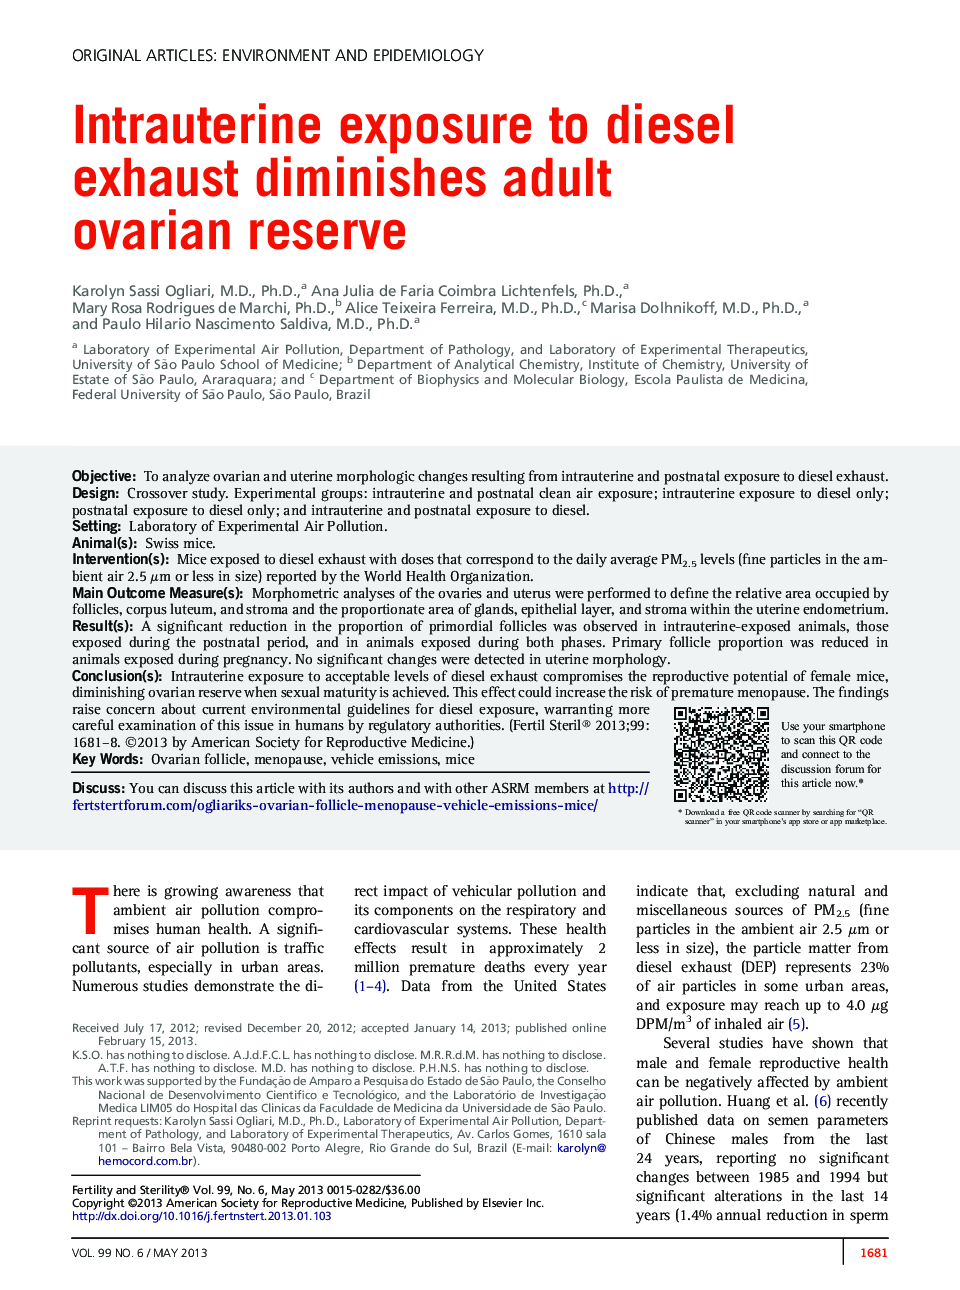 Intrauterine exposure to diesel exhaust diminishes adult ovarian reserve